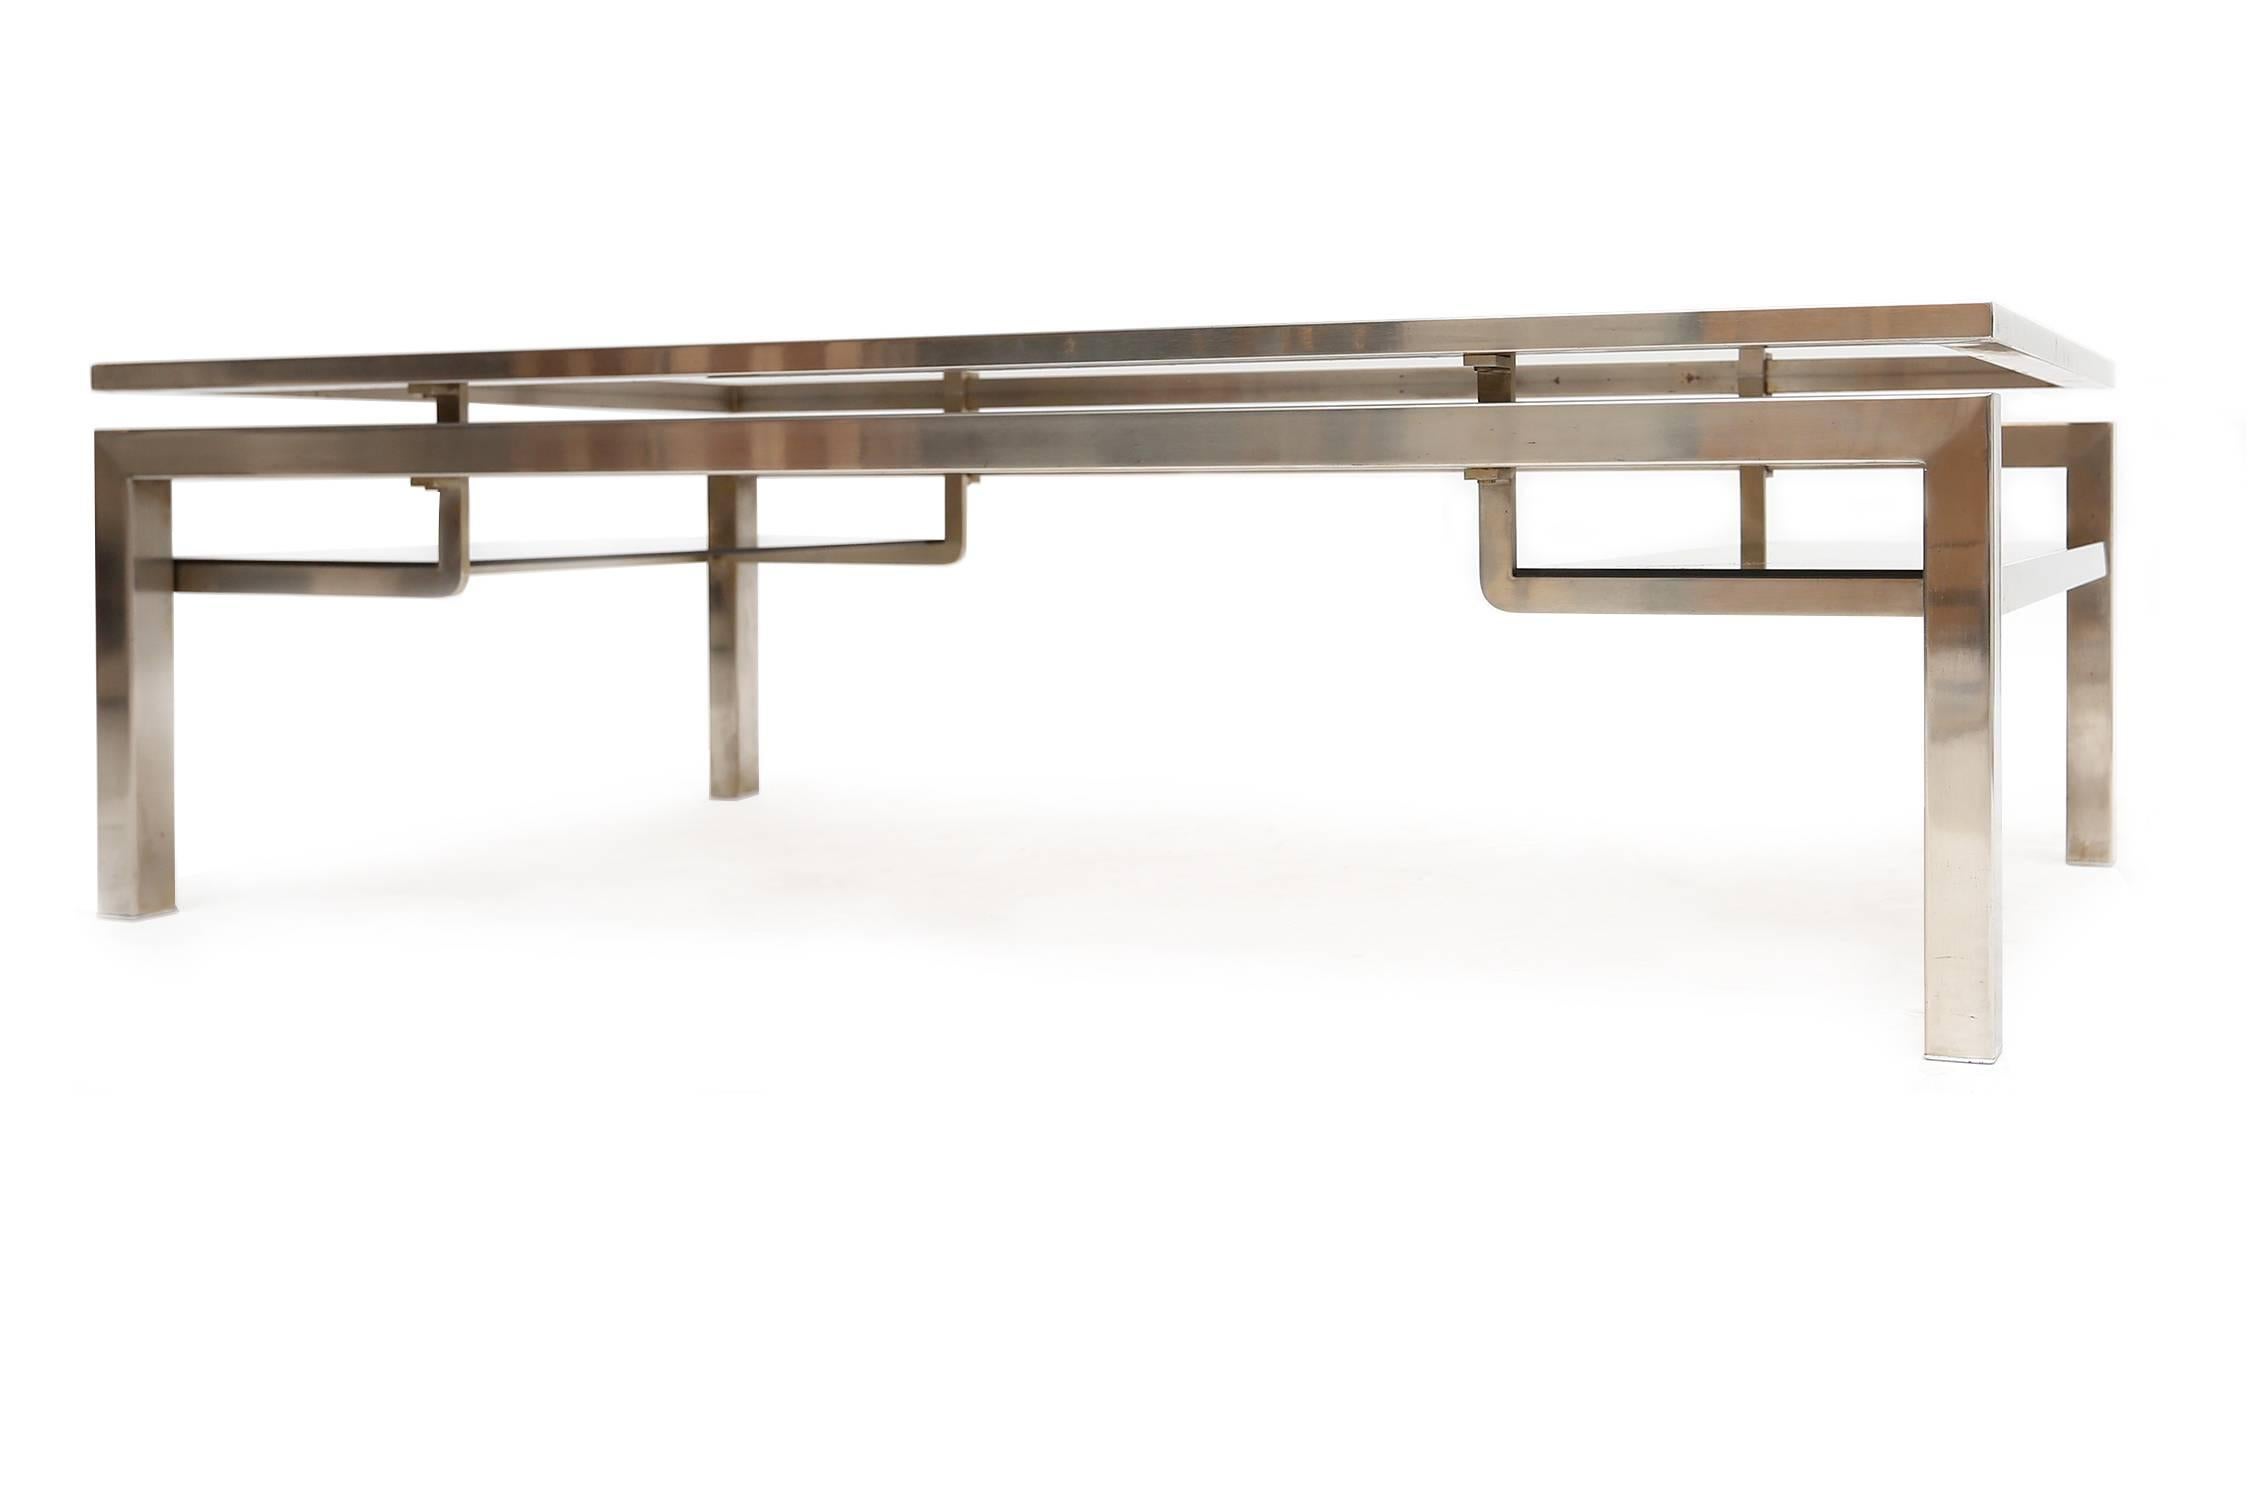 Two-tier coffee table chrome smoked glass
attributed to Guy Lefevre for Maison Jansen,
France, 1970s.
Measures: L 127 cm, D 67 cm, H 38 cm.